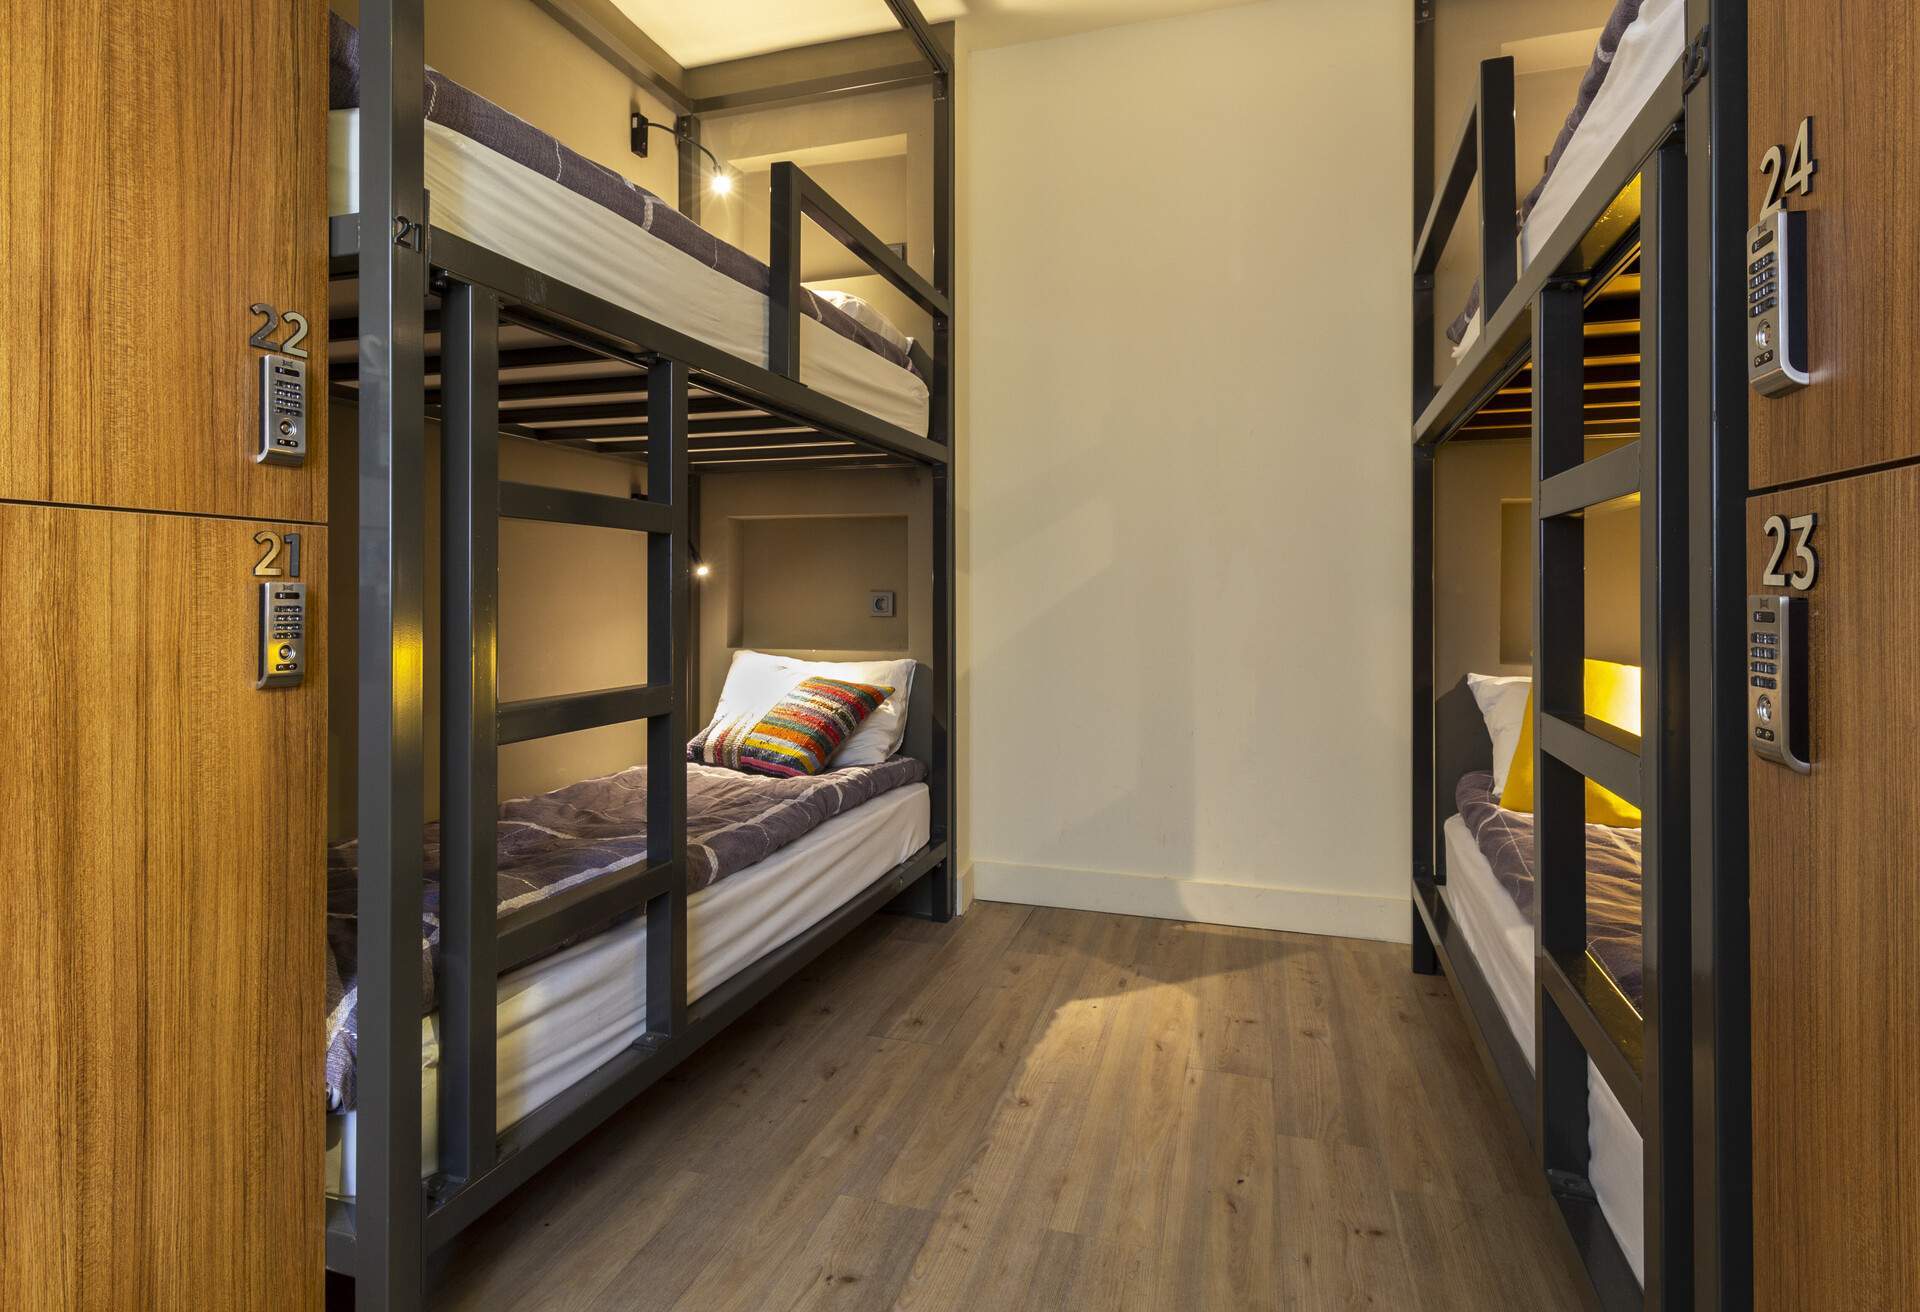 Room of a hostel with bunk beds and locker rooms.